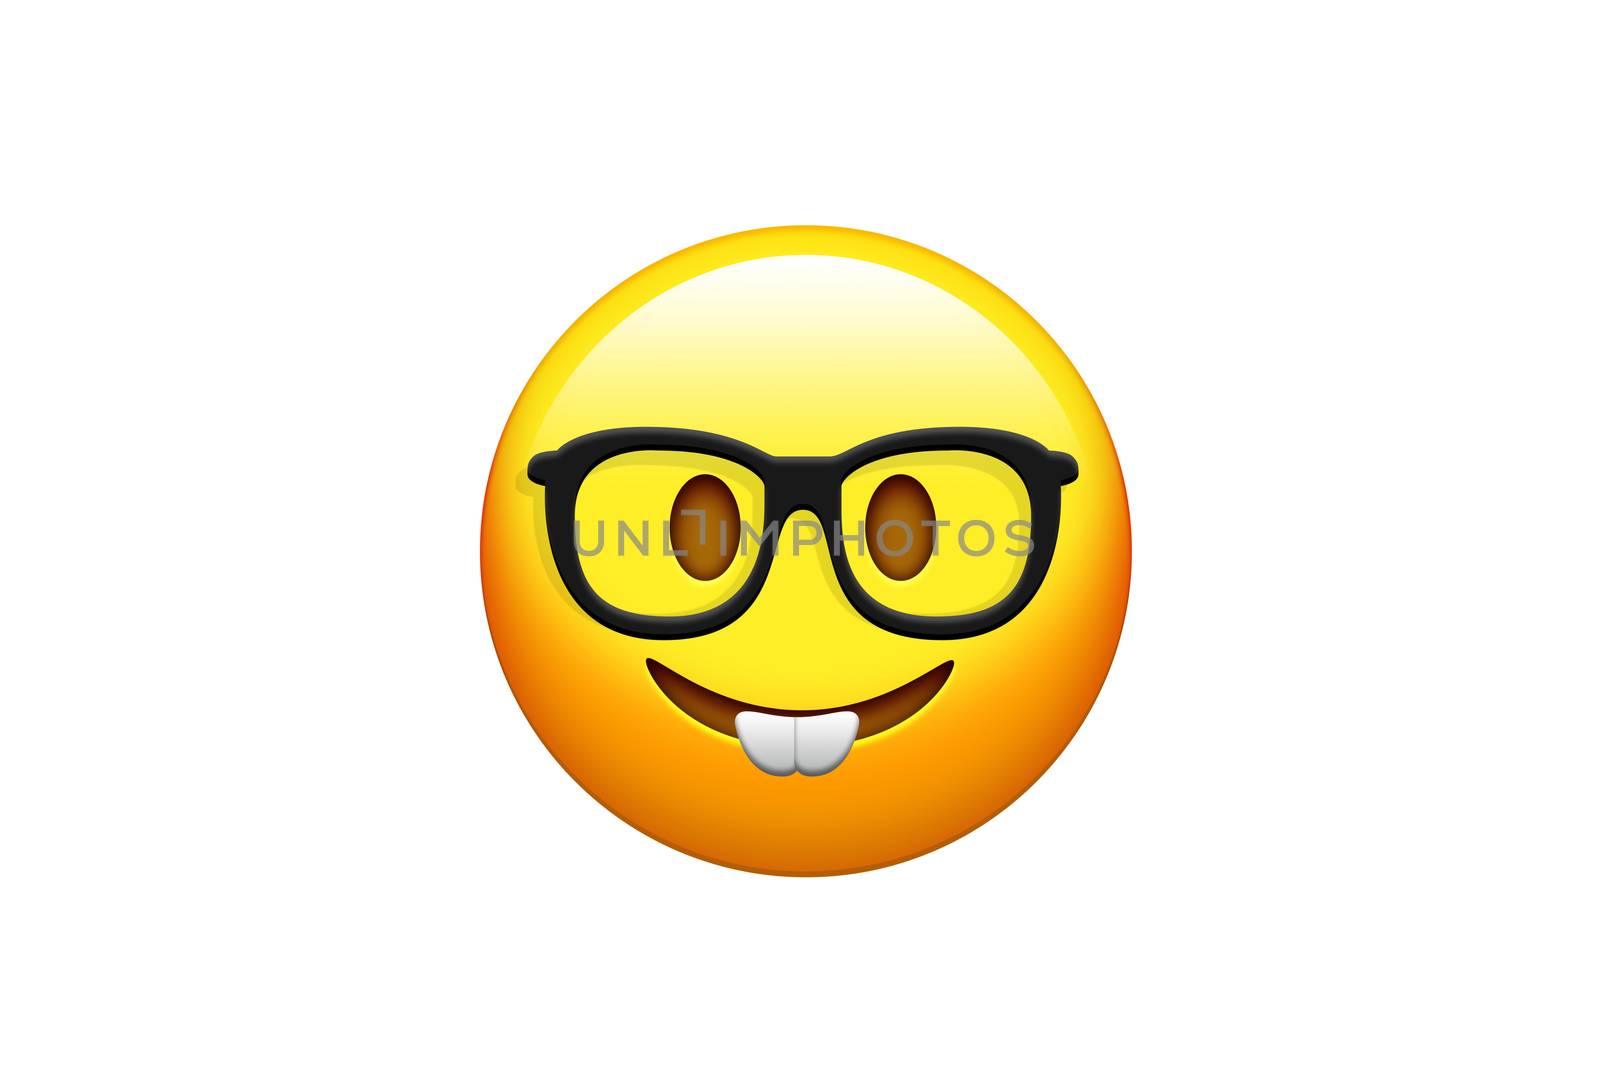 Isolated yellow happy face with white teeth and glasses icon by cougarsan